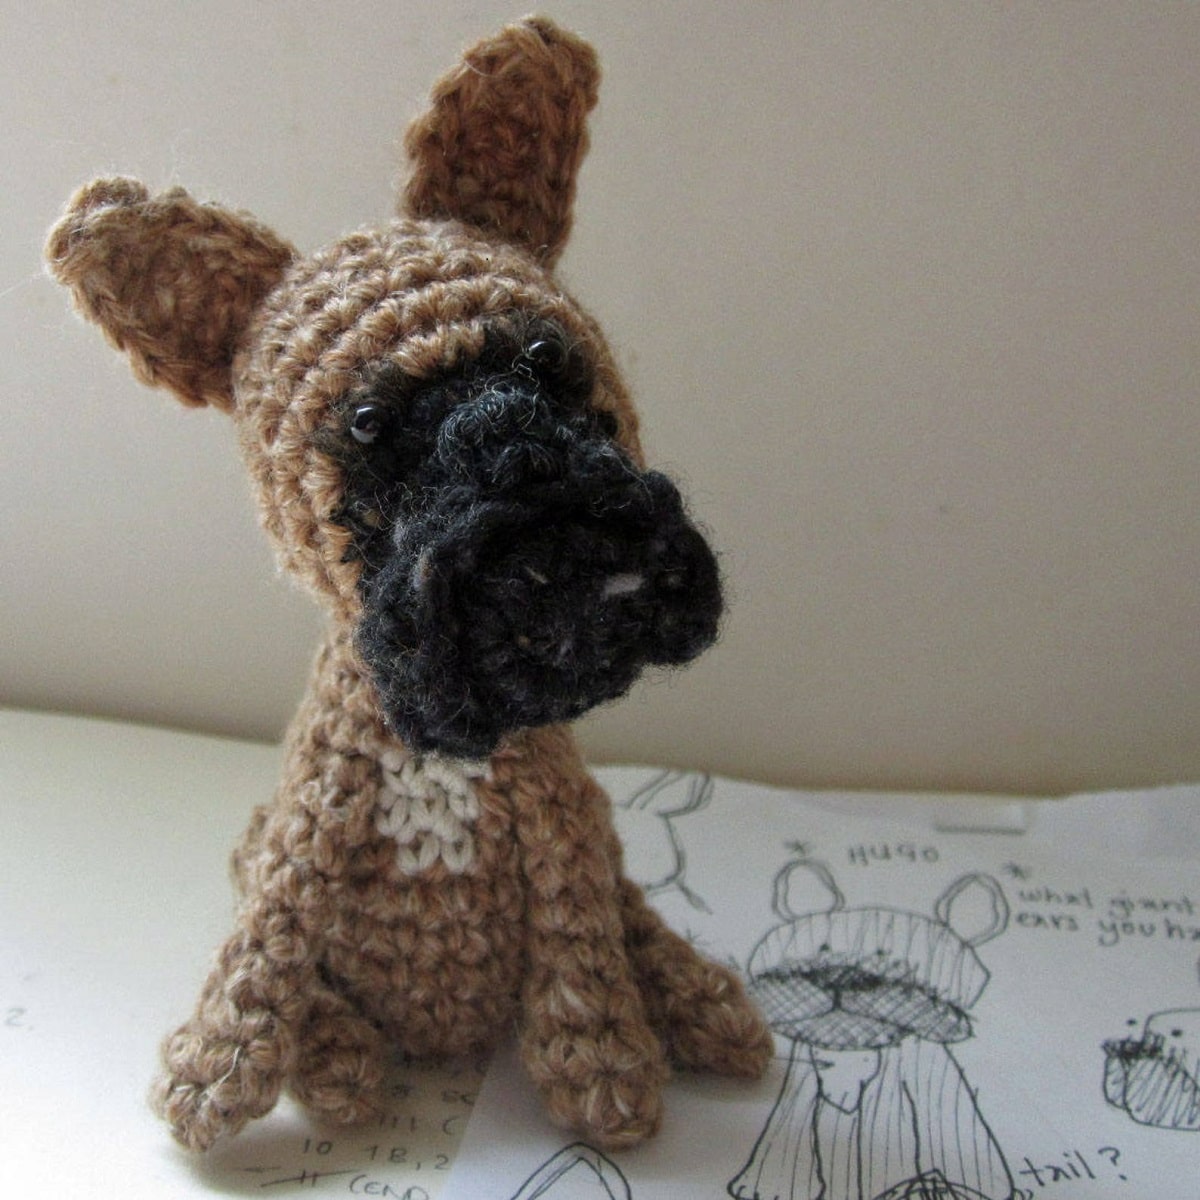 Small crochet stuffed French Bulldog with a brown body and ears and a black face sitting on a white background.